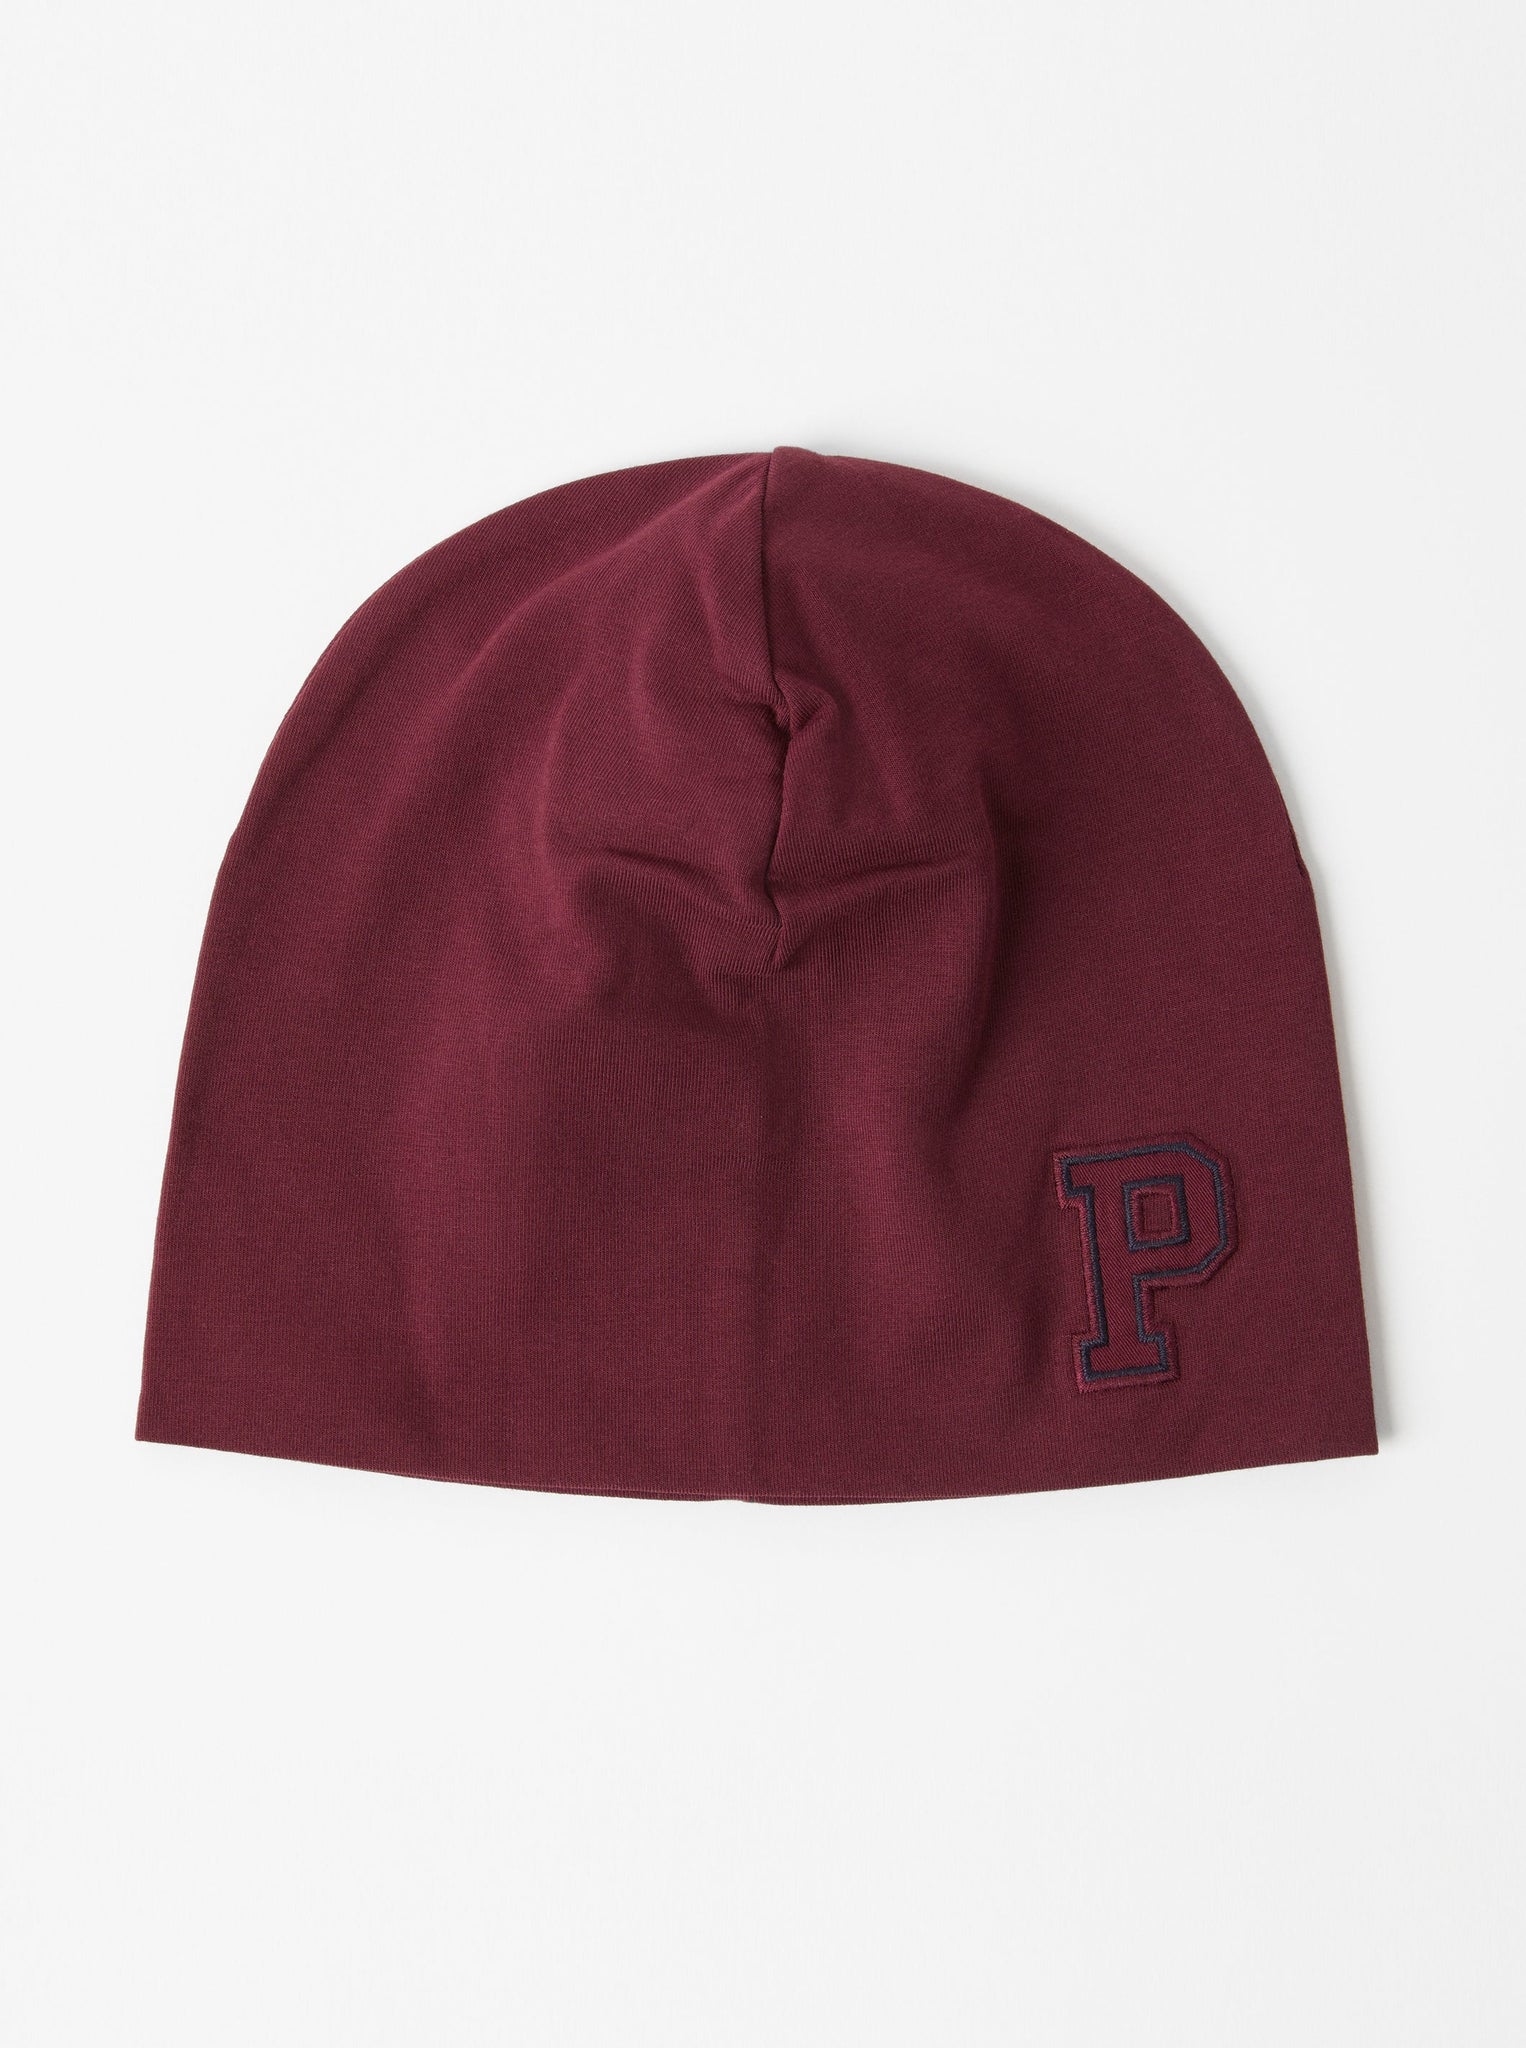 Organic Cotton Burgundy Kids Beanie from the Polarn O. Pyret kidswear collection. Made using ethically sourced materials.